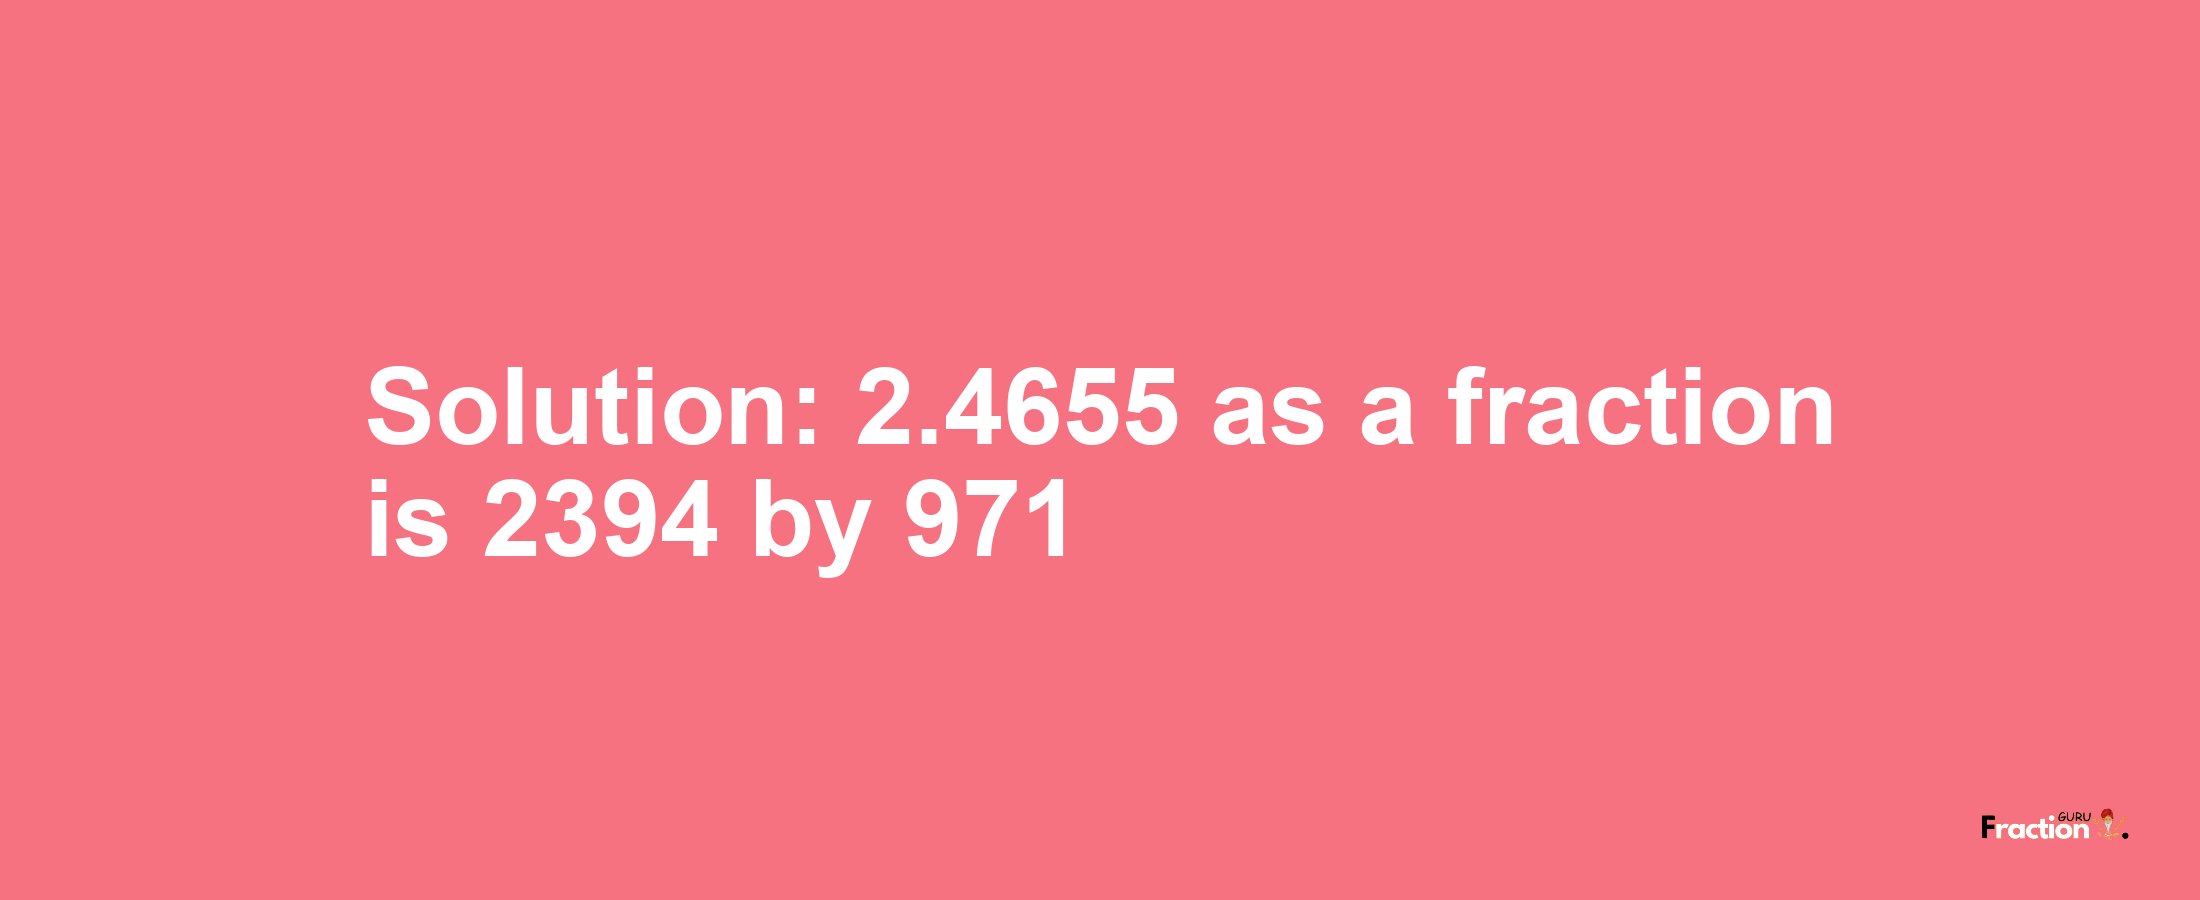 Solution:2.4655 as a fraction is 2394/971